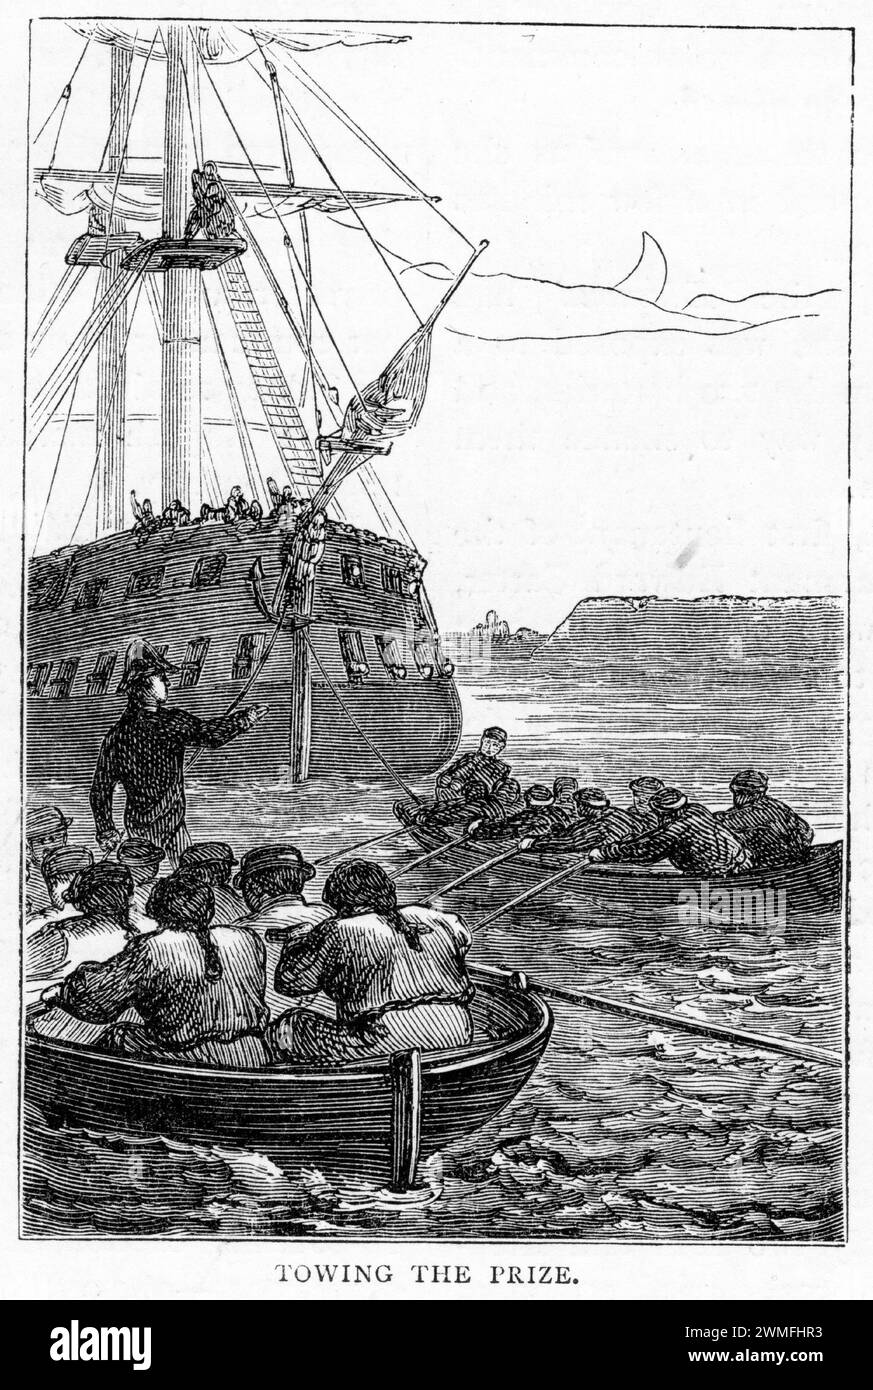 Engraving of sailors in a rowboat towing a ship captured in battle, circa 1880 Stock Photo